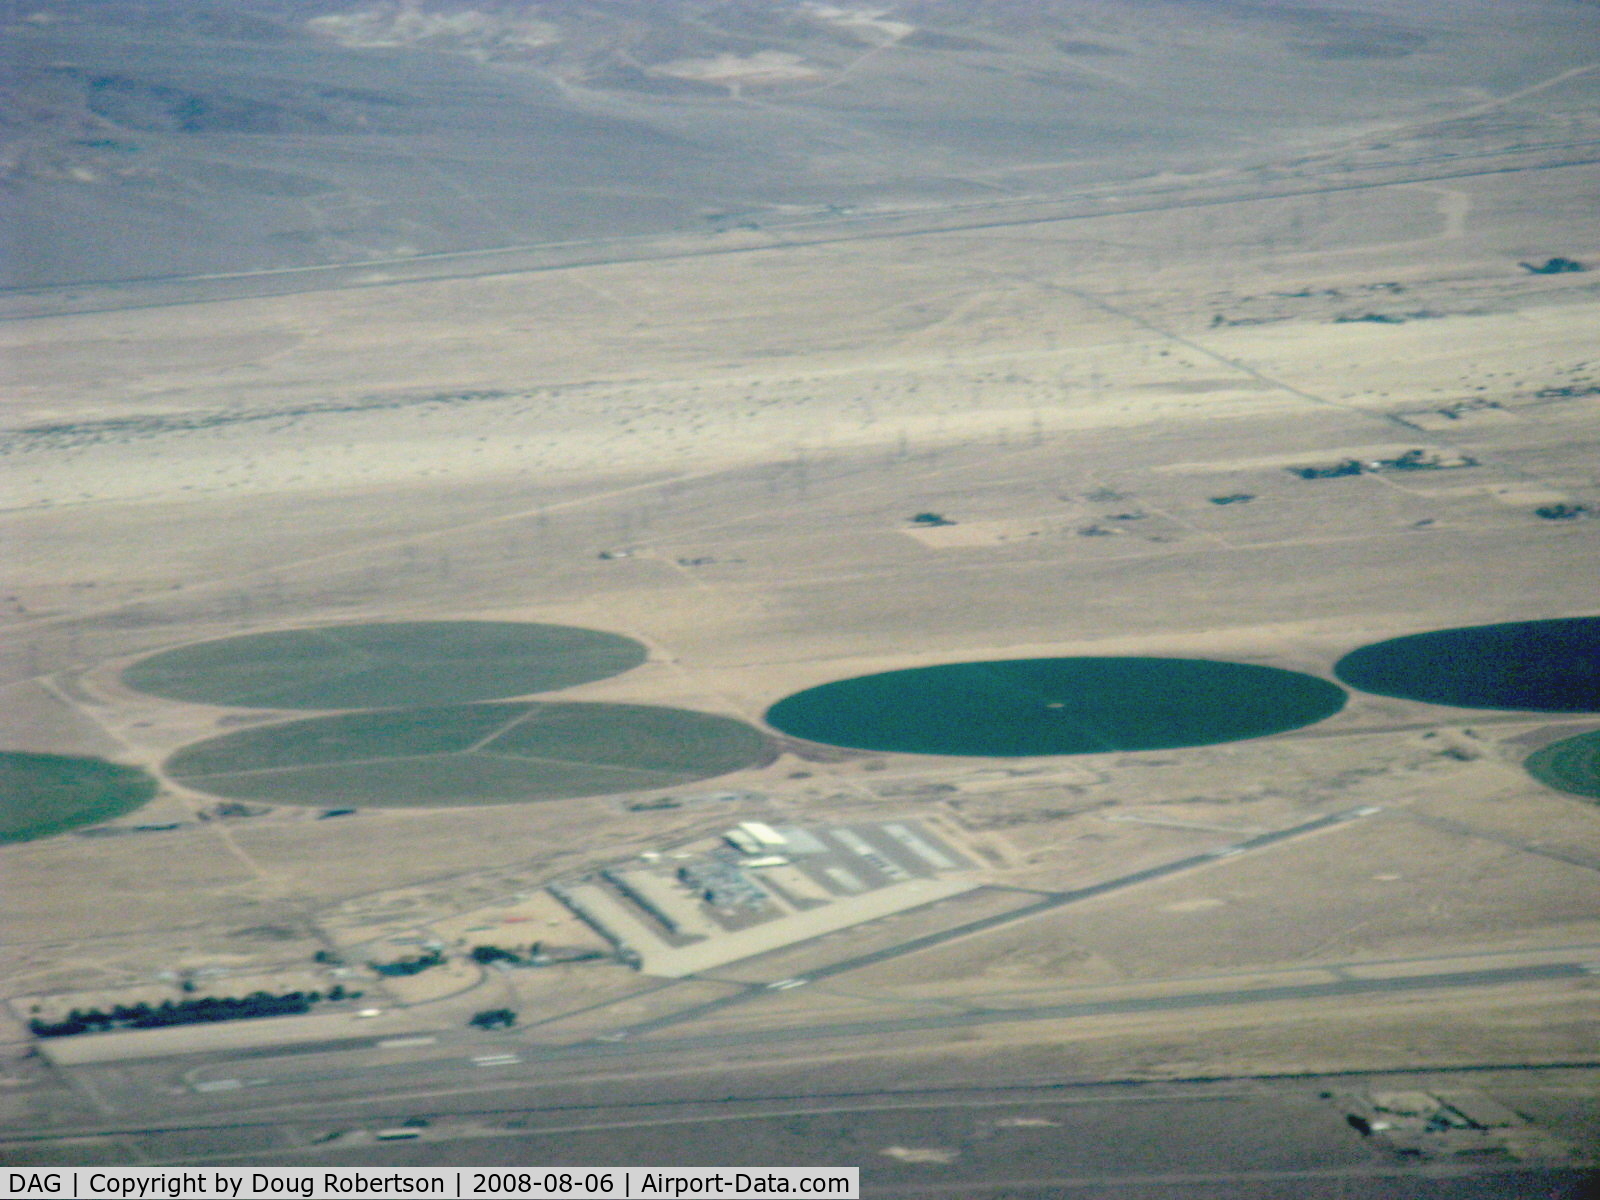 Barstow-daggett Airport (DAG) - Daggett-Barstow Airport, CA. from 8,500' msl looking North